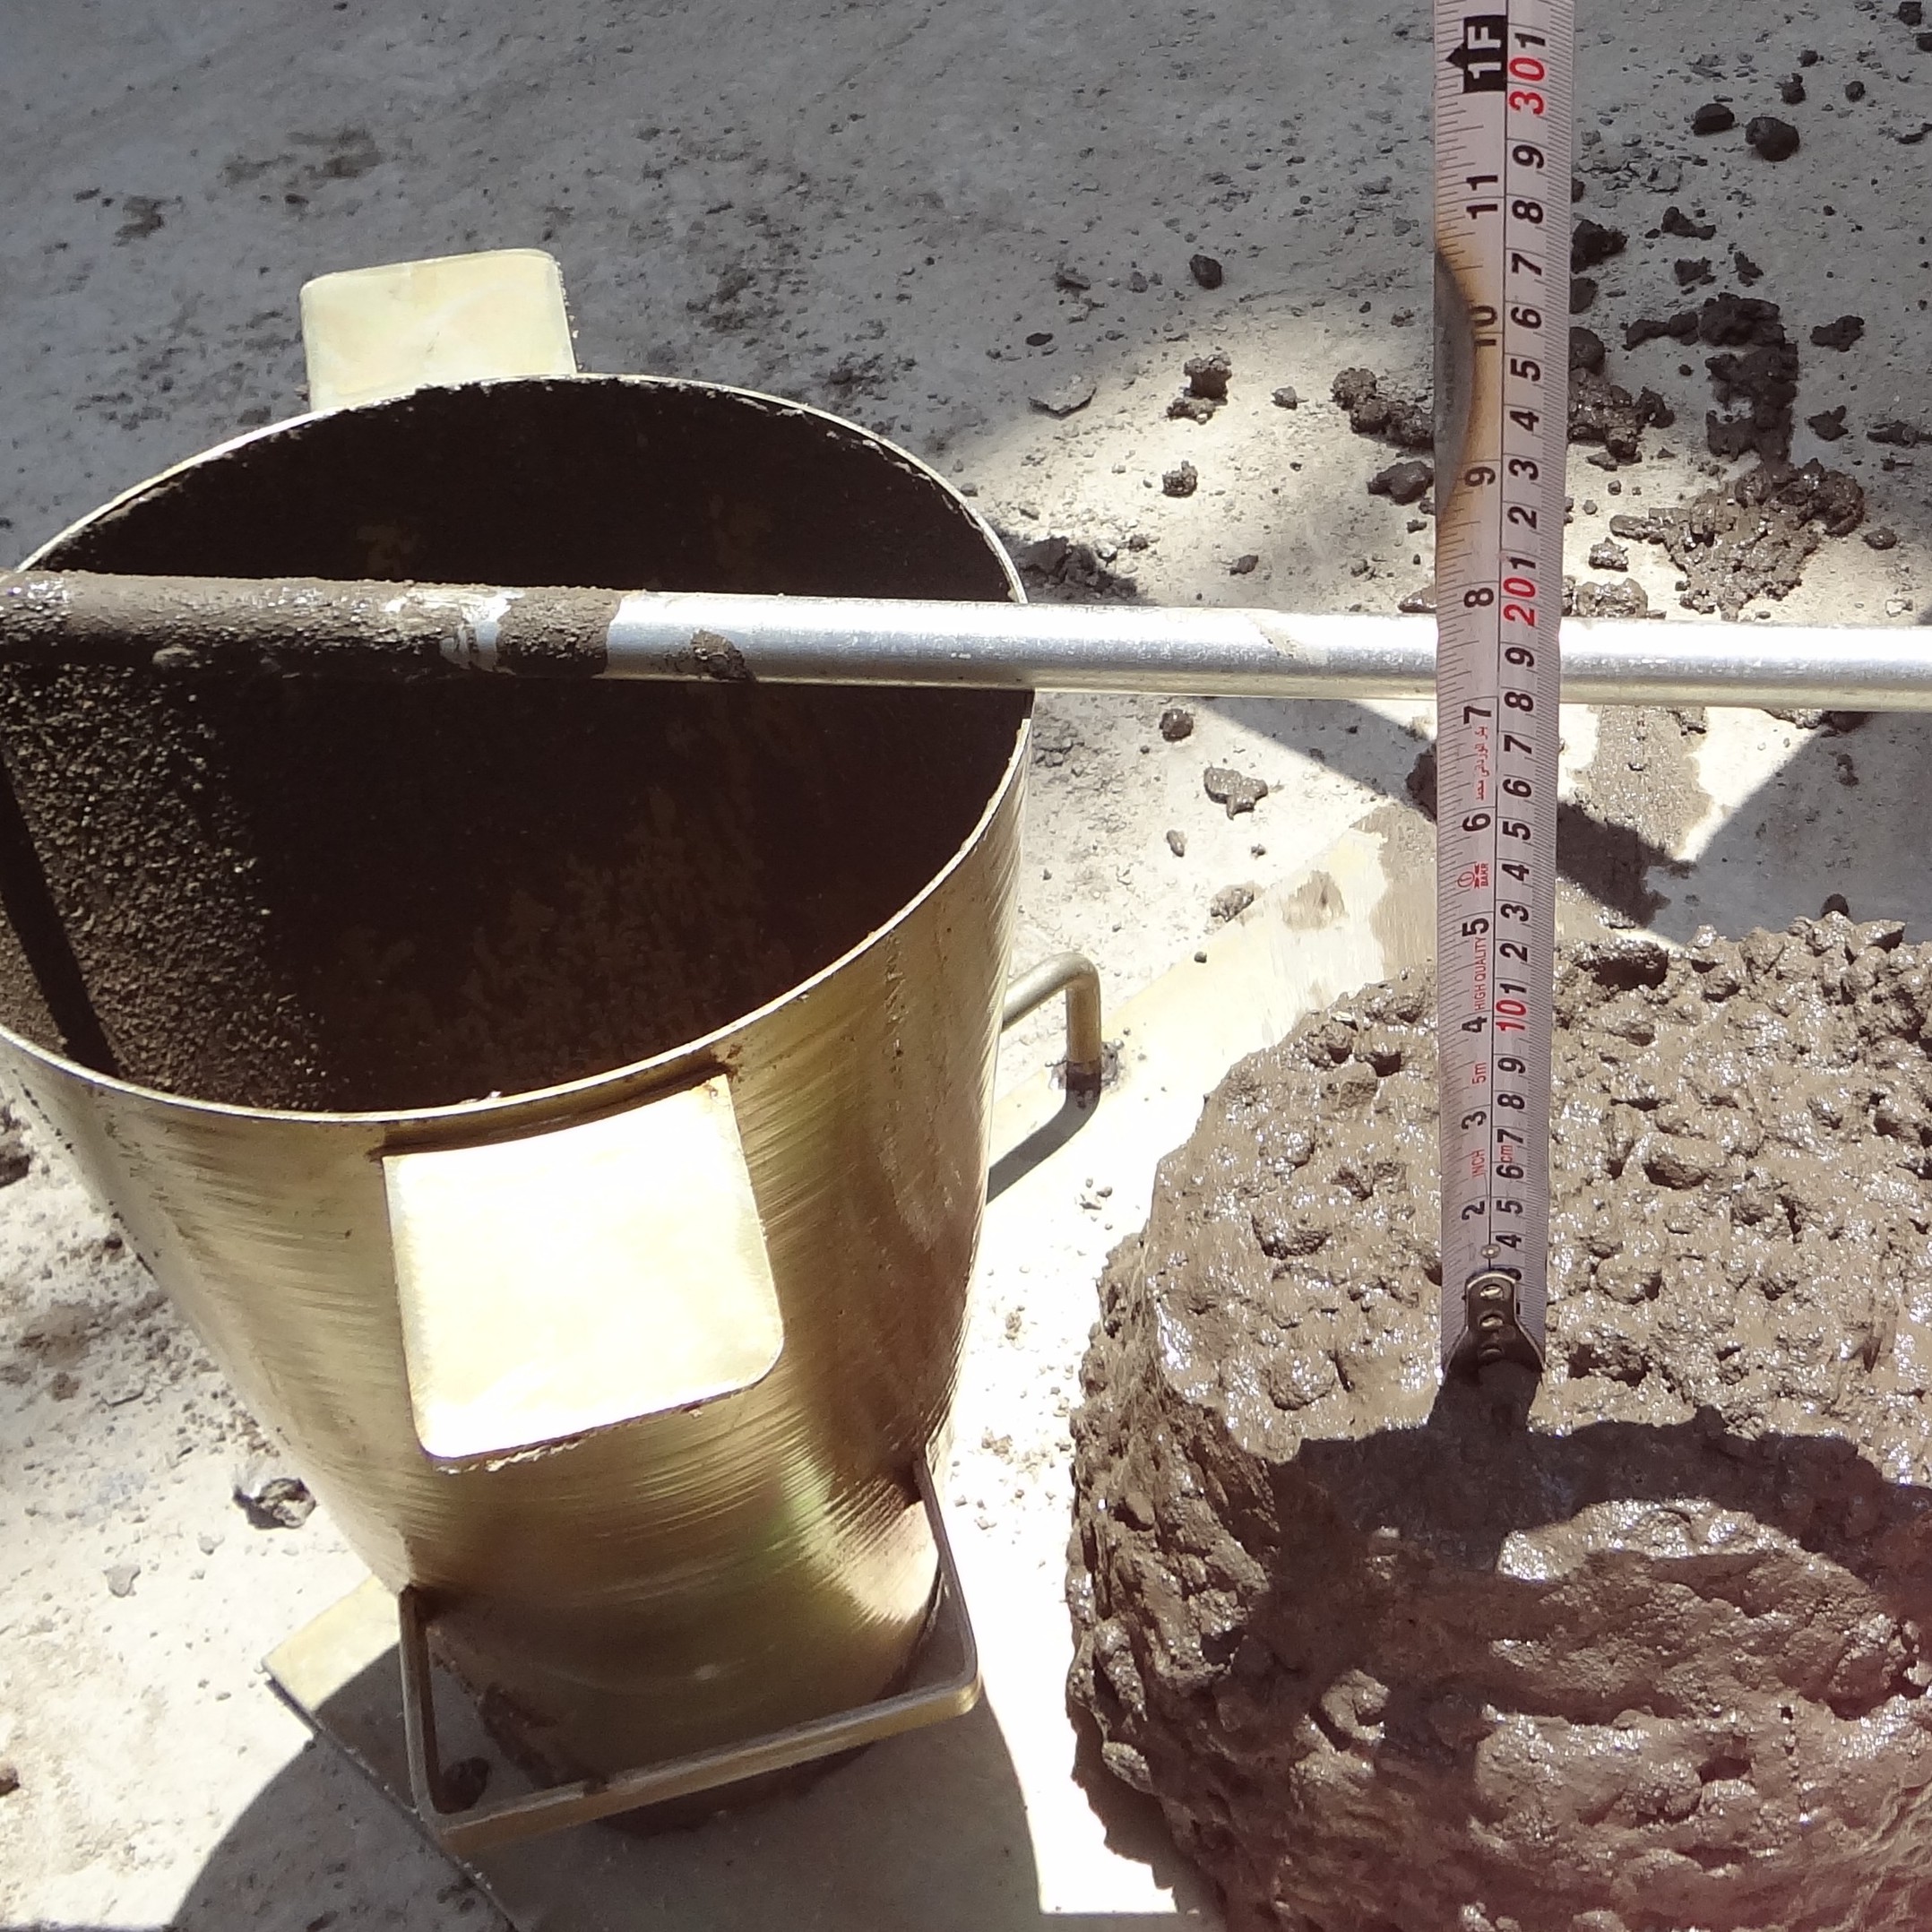 MY CONCRETE IS WORKABLE … MINE IS CONSISTENT, WHICH TERM IS RIGHT?